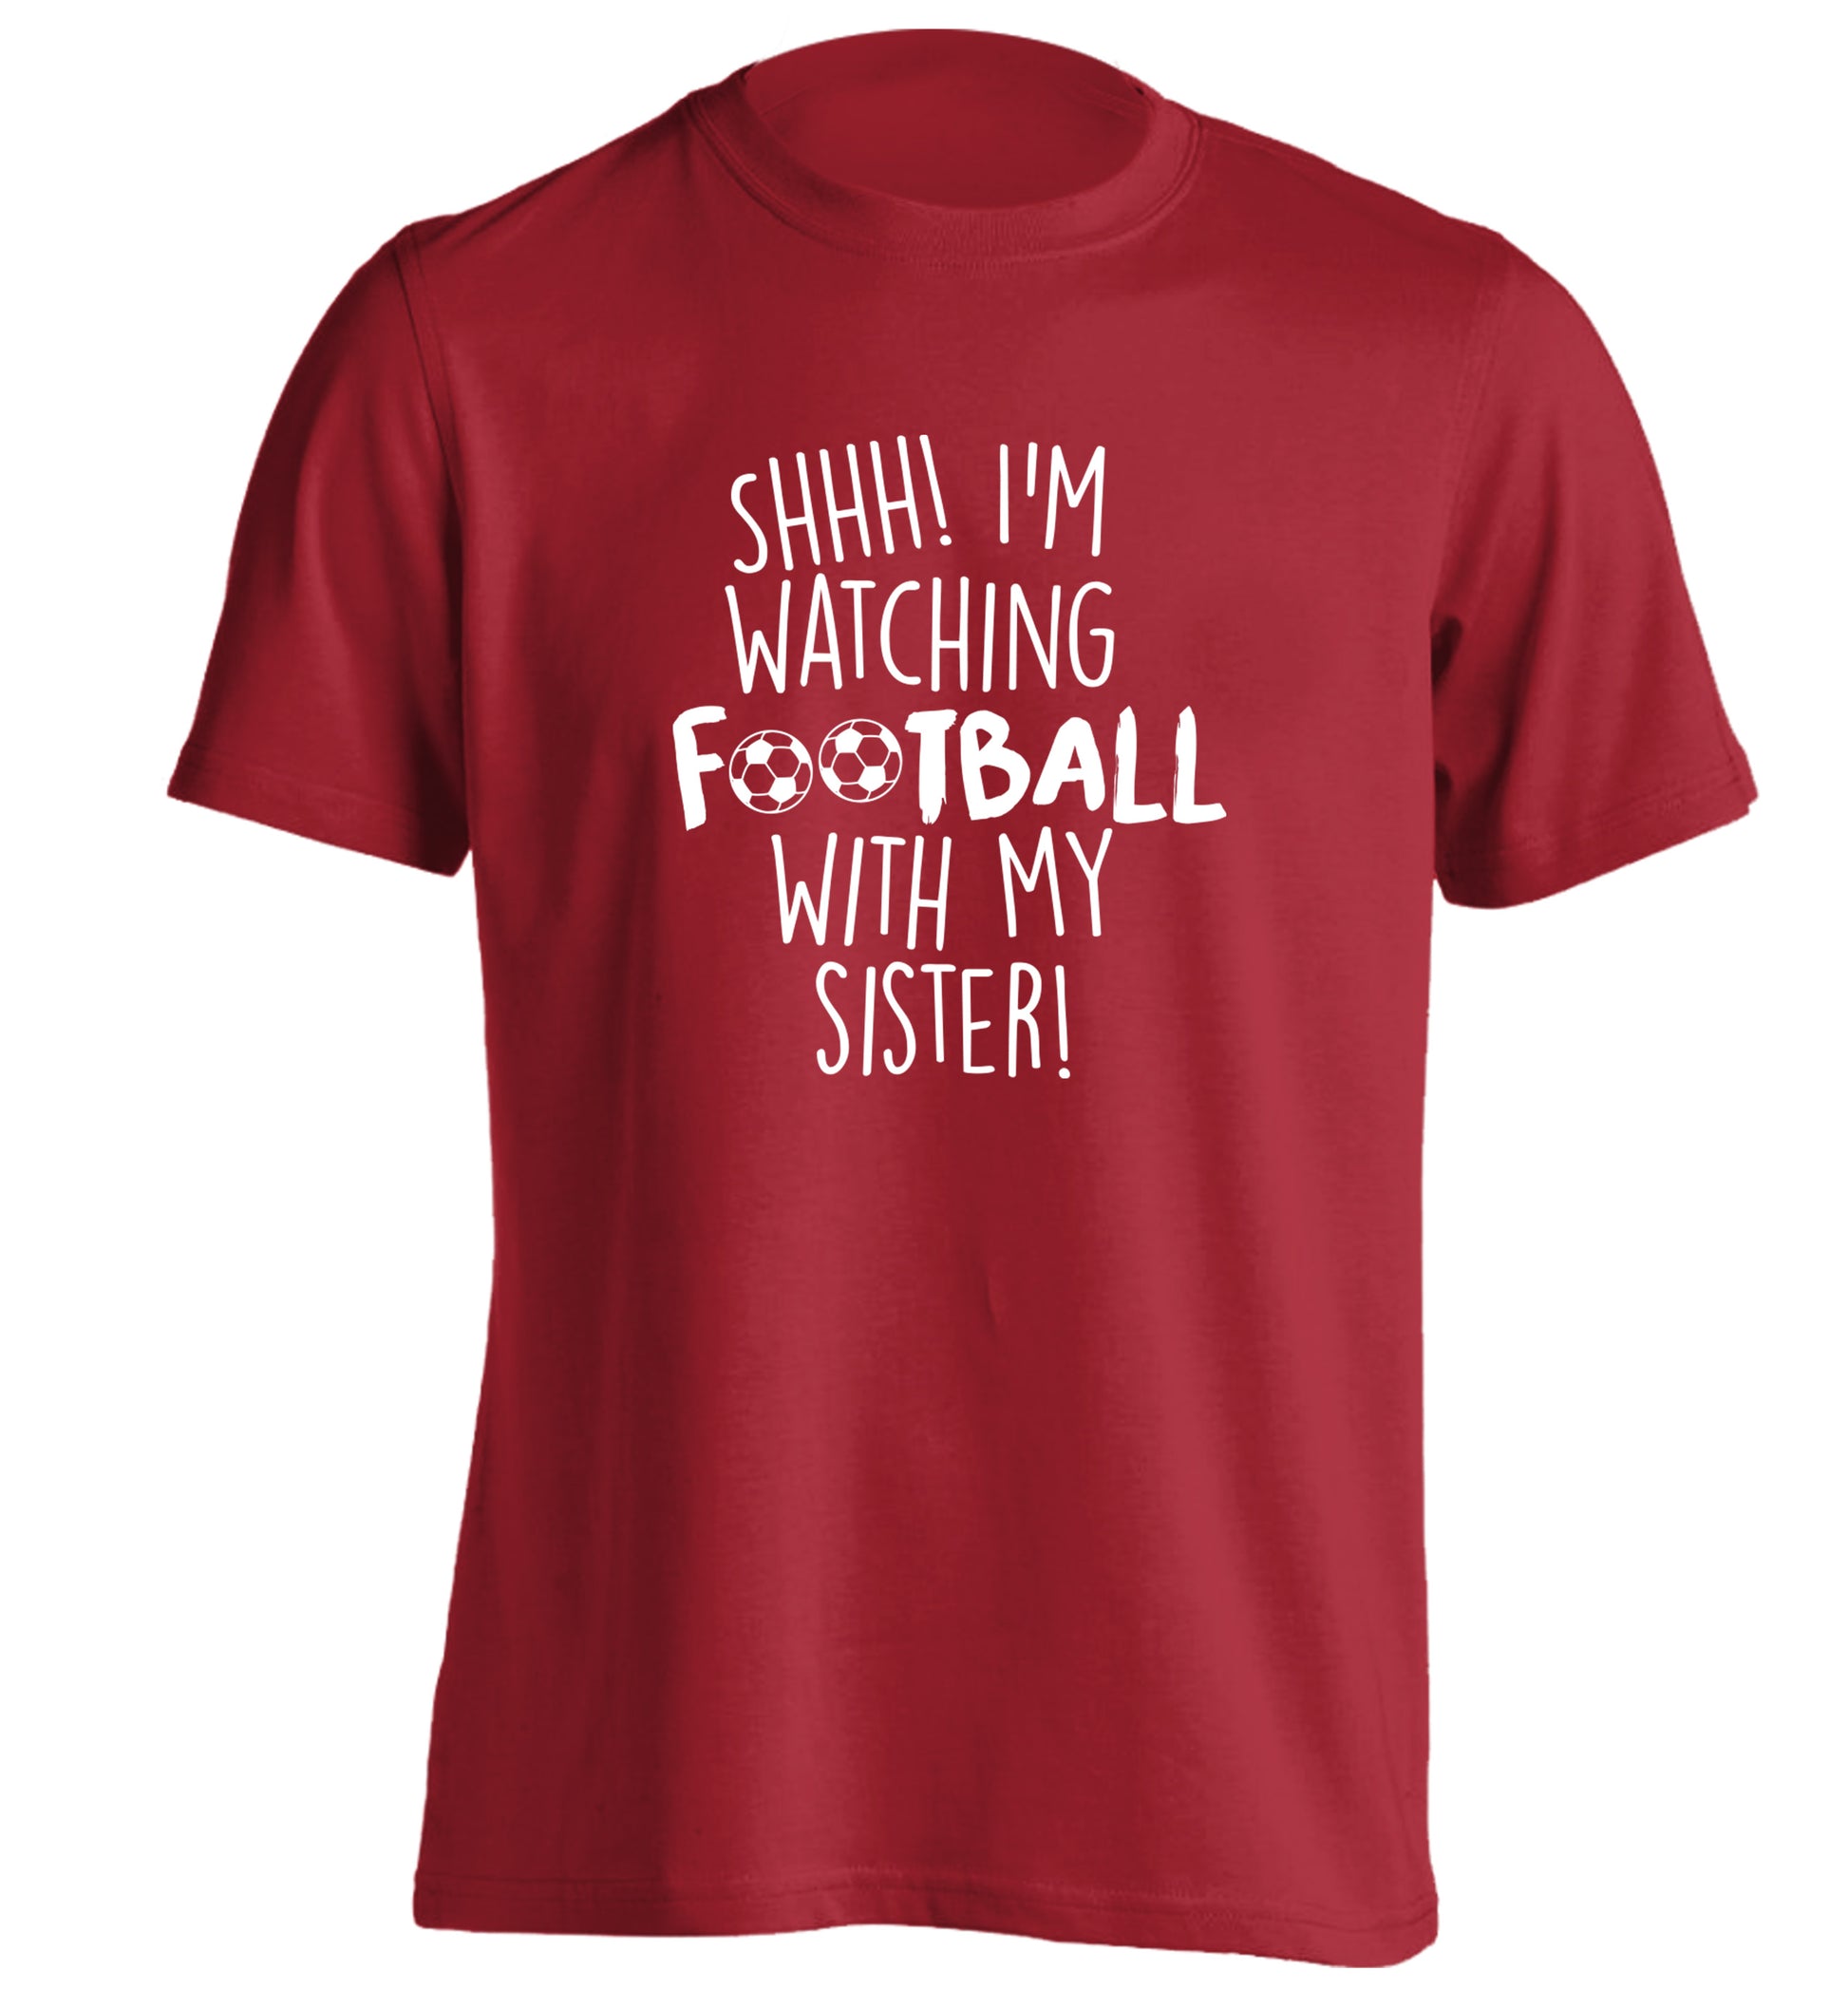 Shhh I'm watching football with my sister adults unisexred Tshirt 2XL